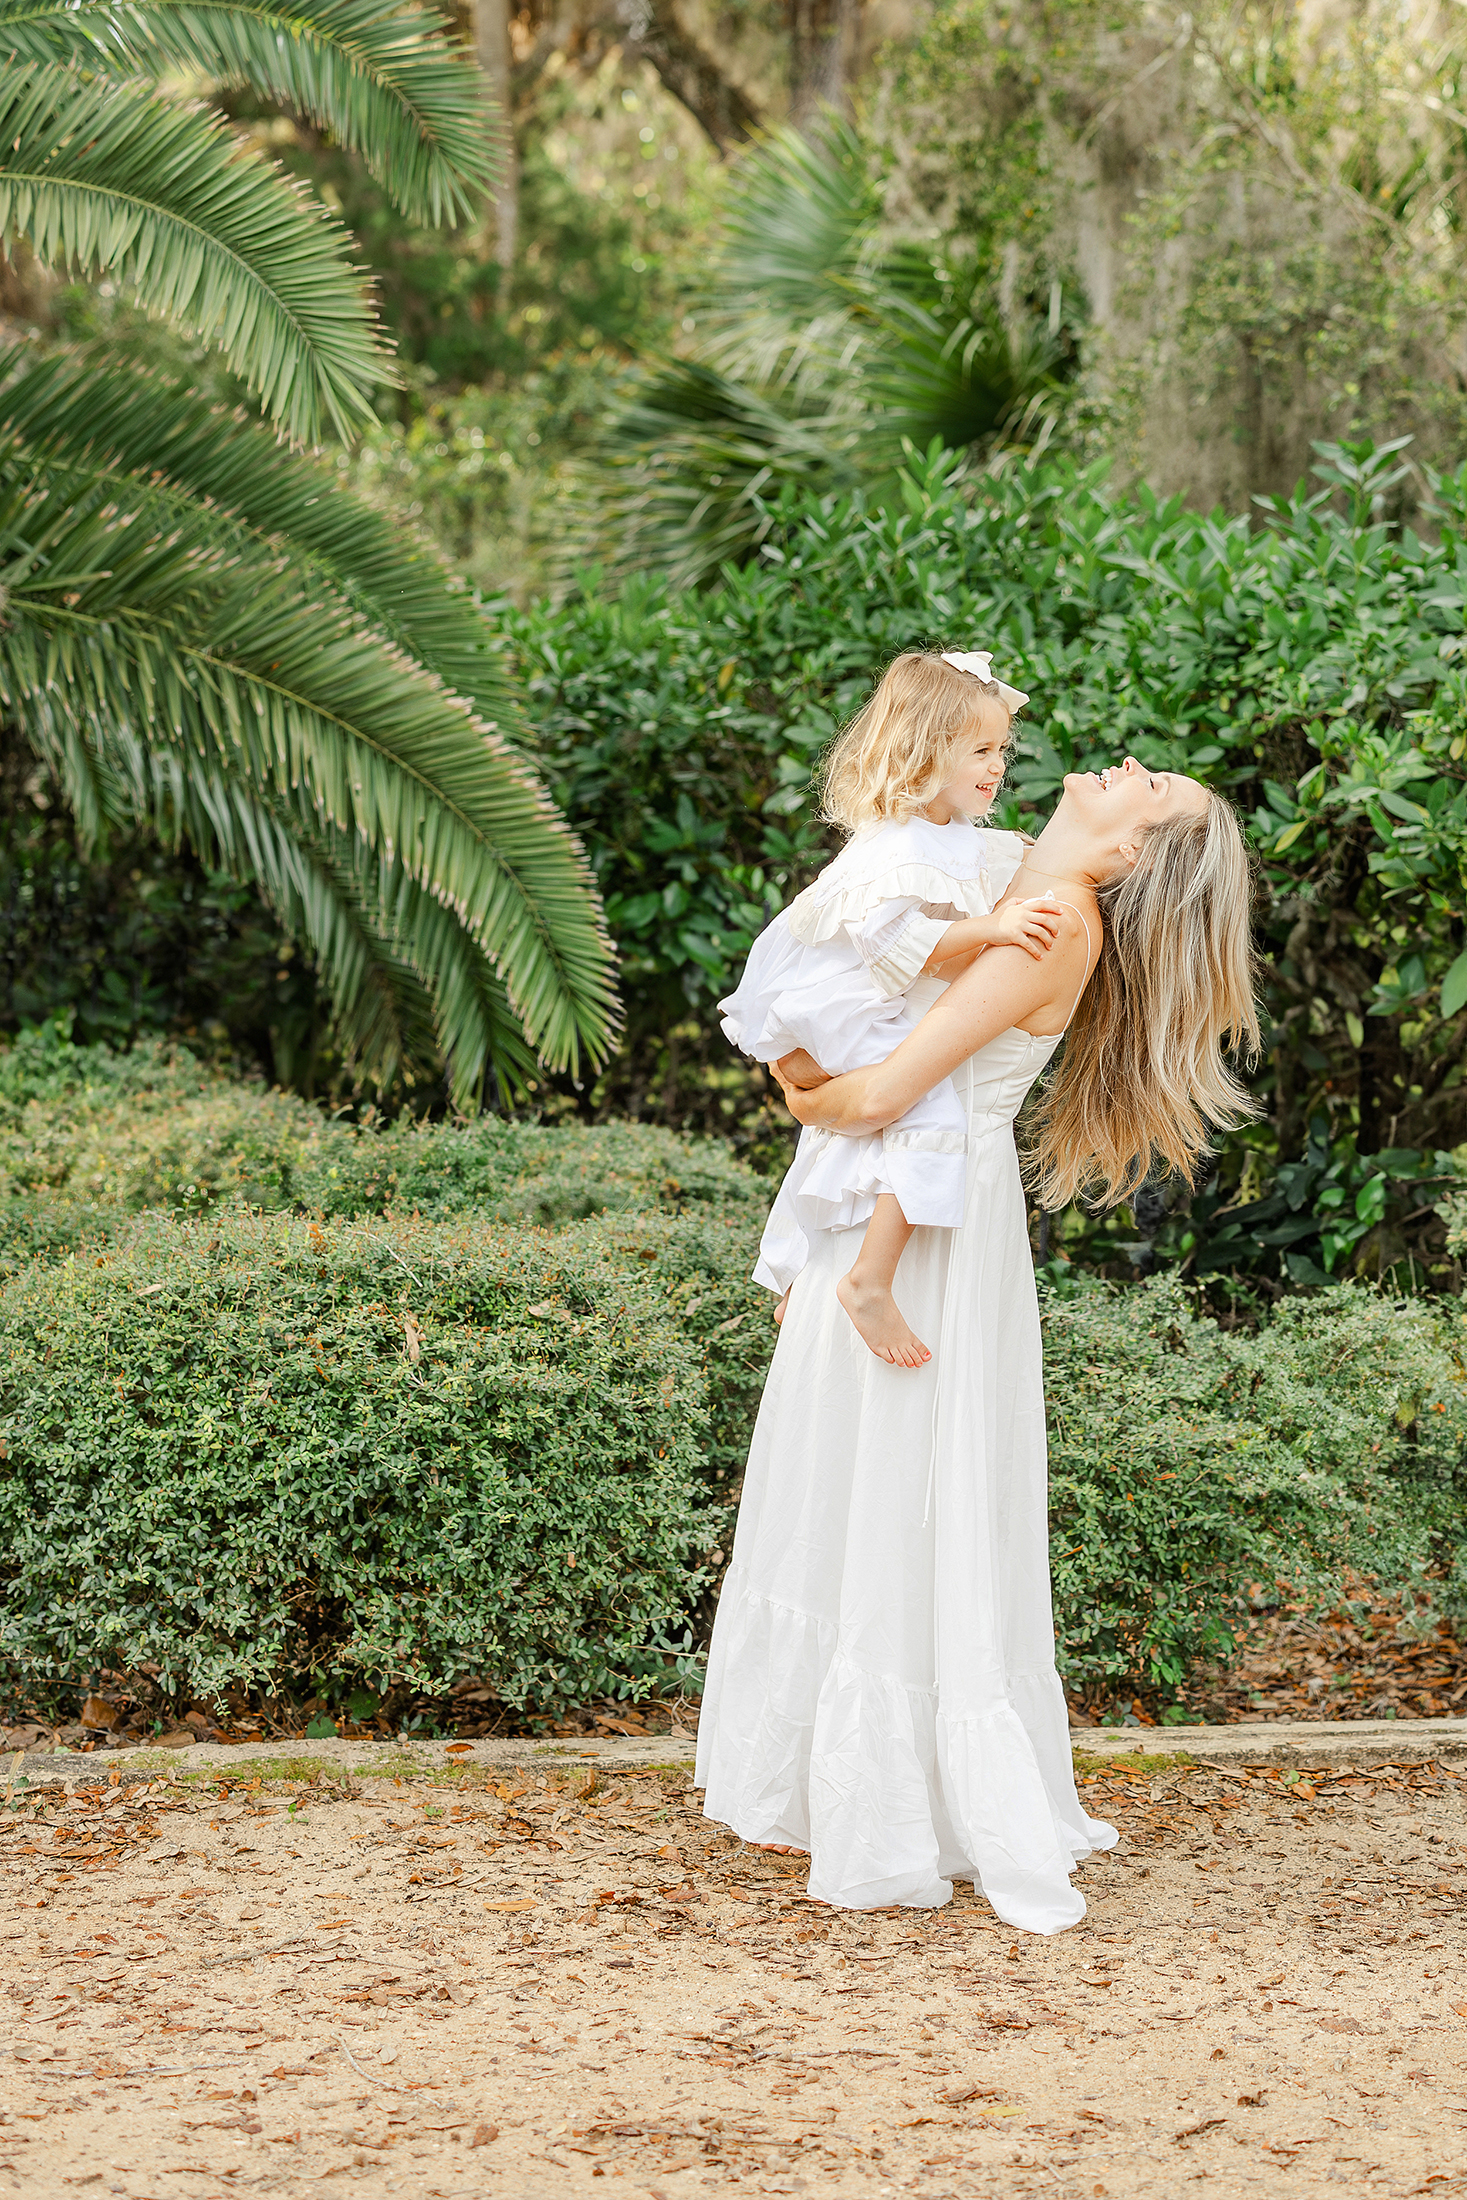 A woman in a long white dress holding a little girl in a white dress at Washington Oaks Gardens State Park.